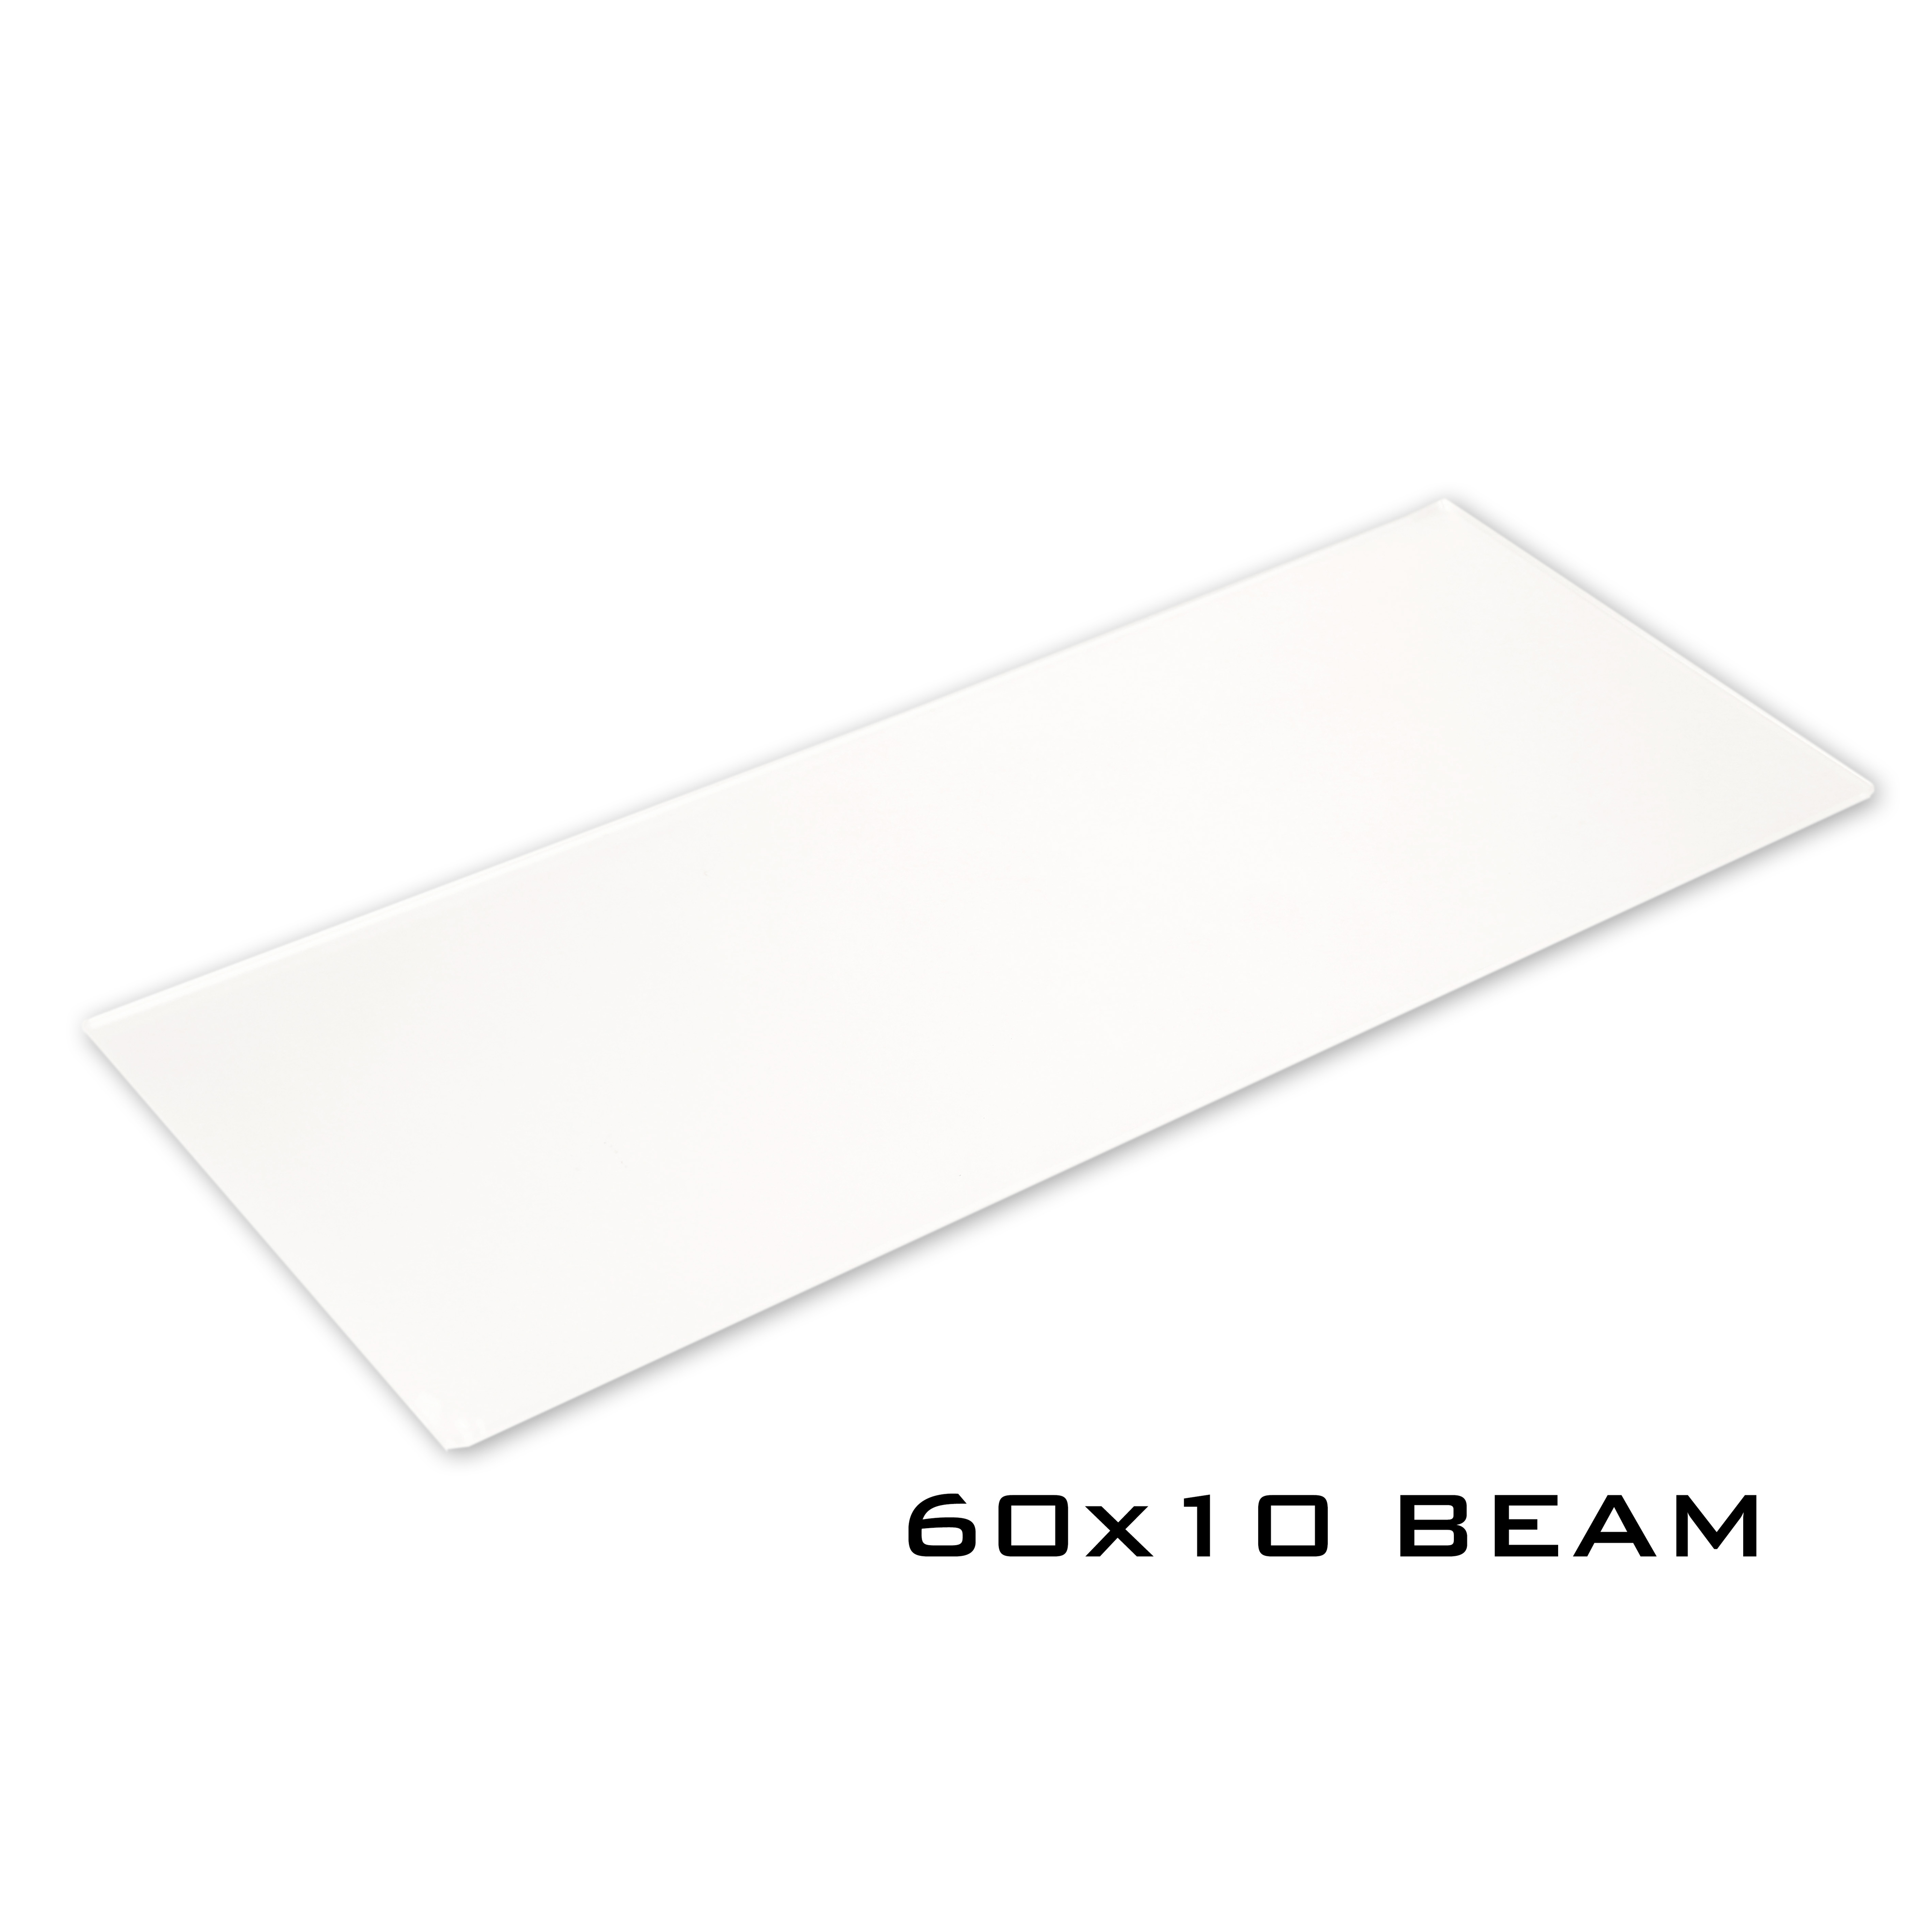 Beam shaper for BT-CHROMA 800: changes the standard beam to 60- horizontal x 10- vertical